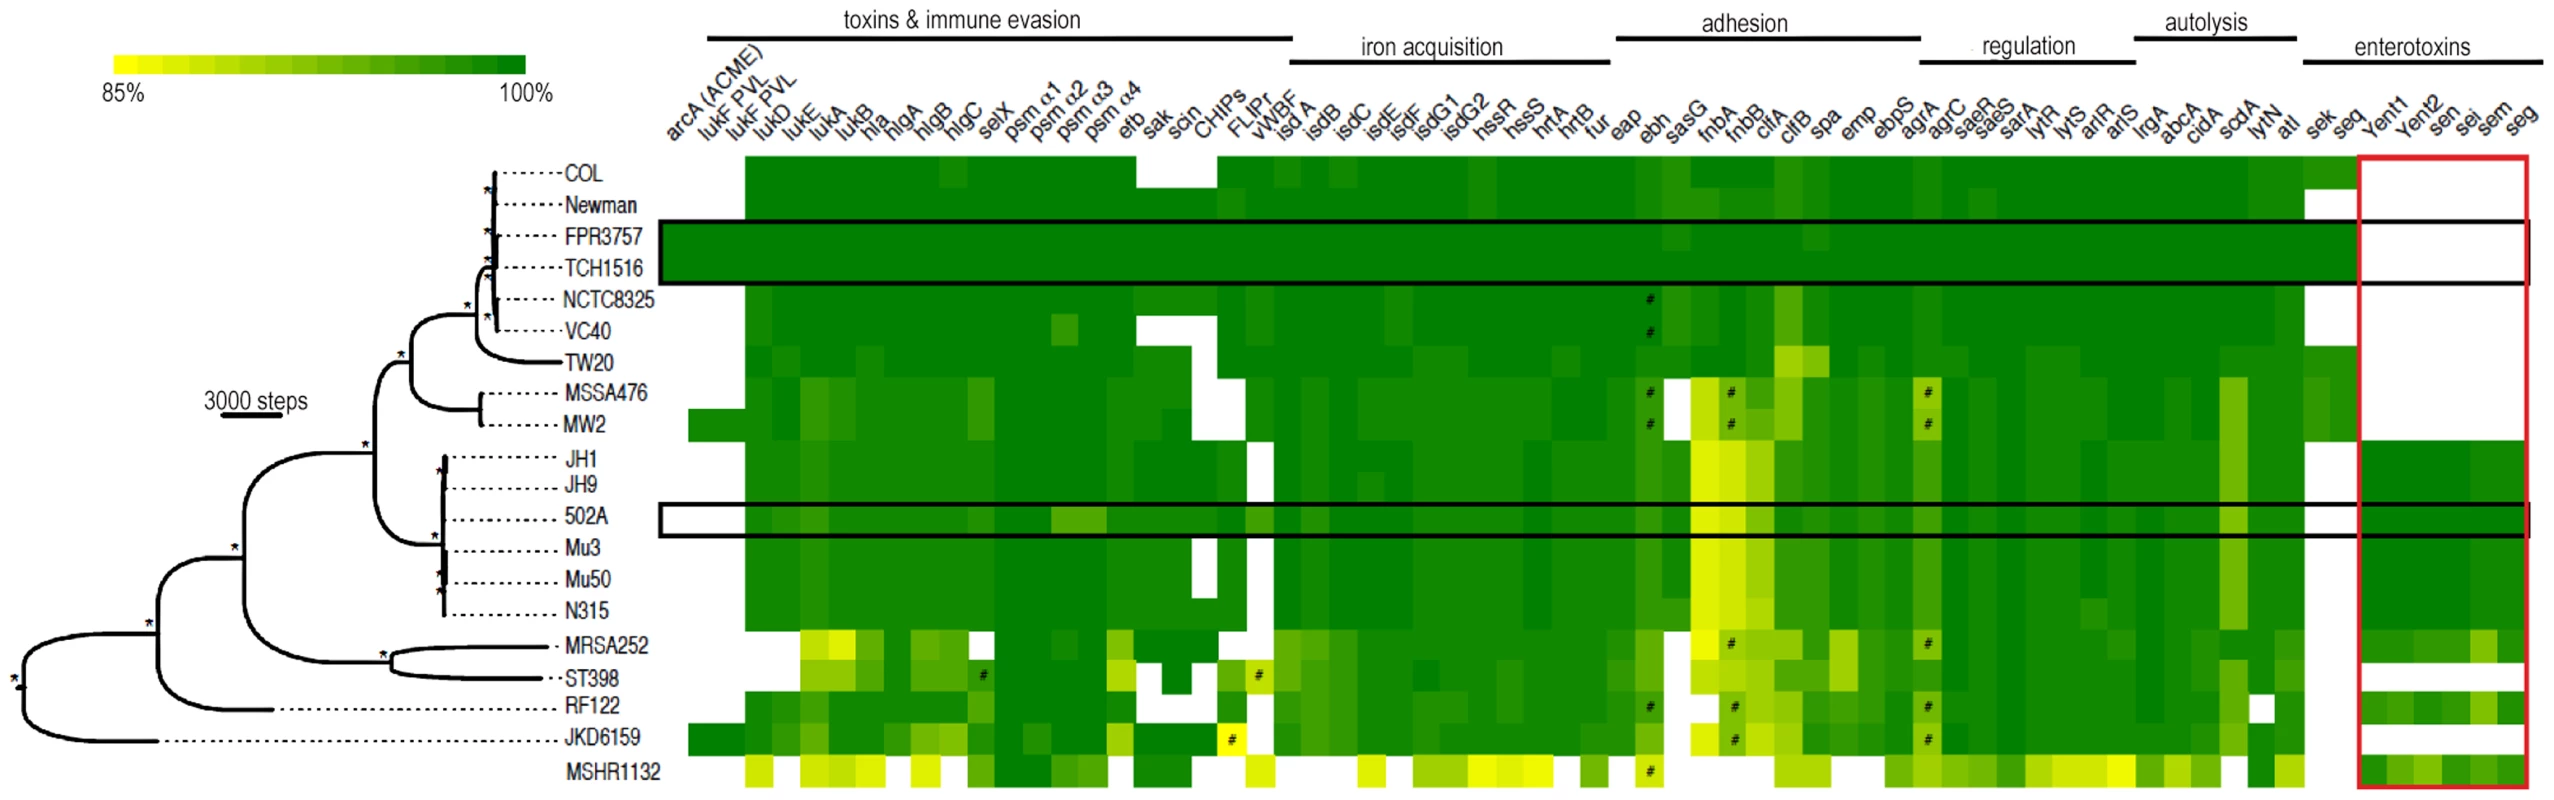 Whole genome phylogeny and heat map of gene content.